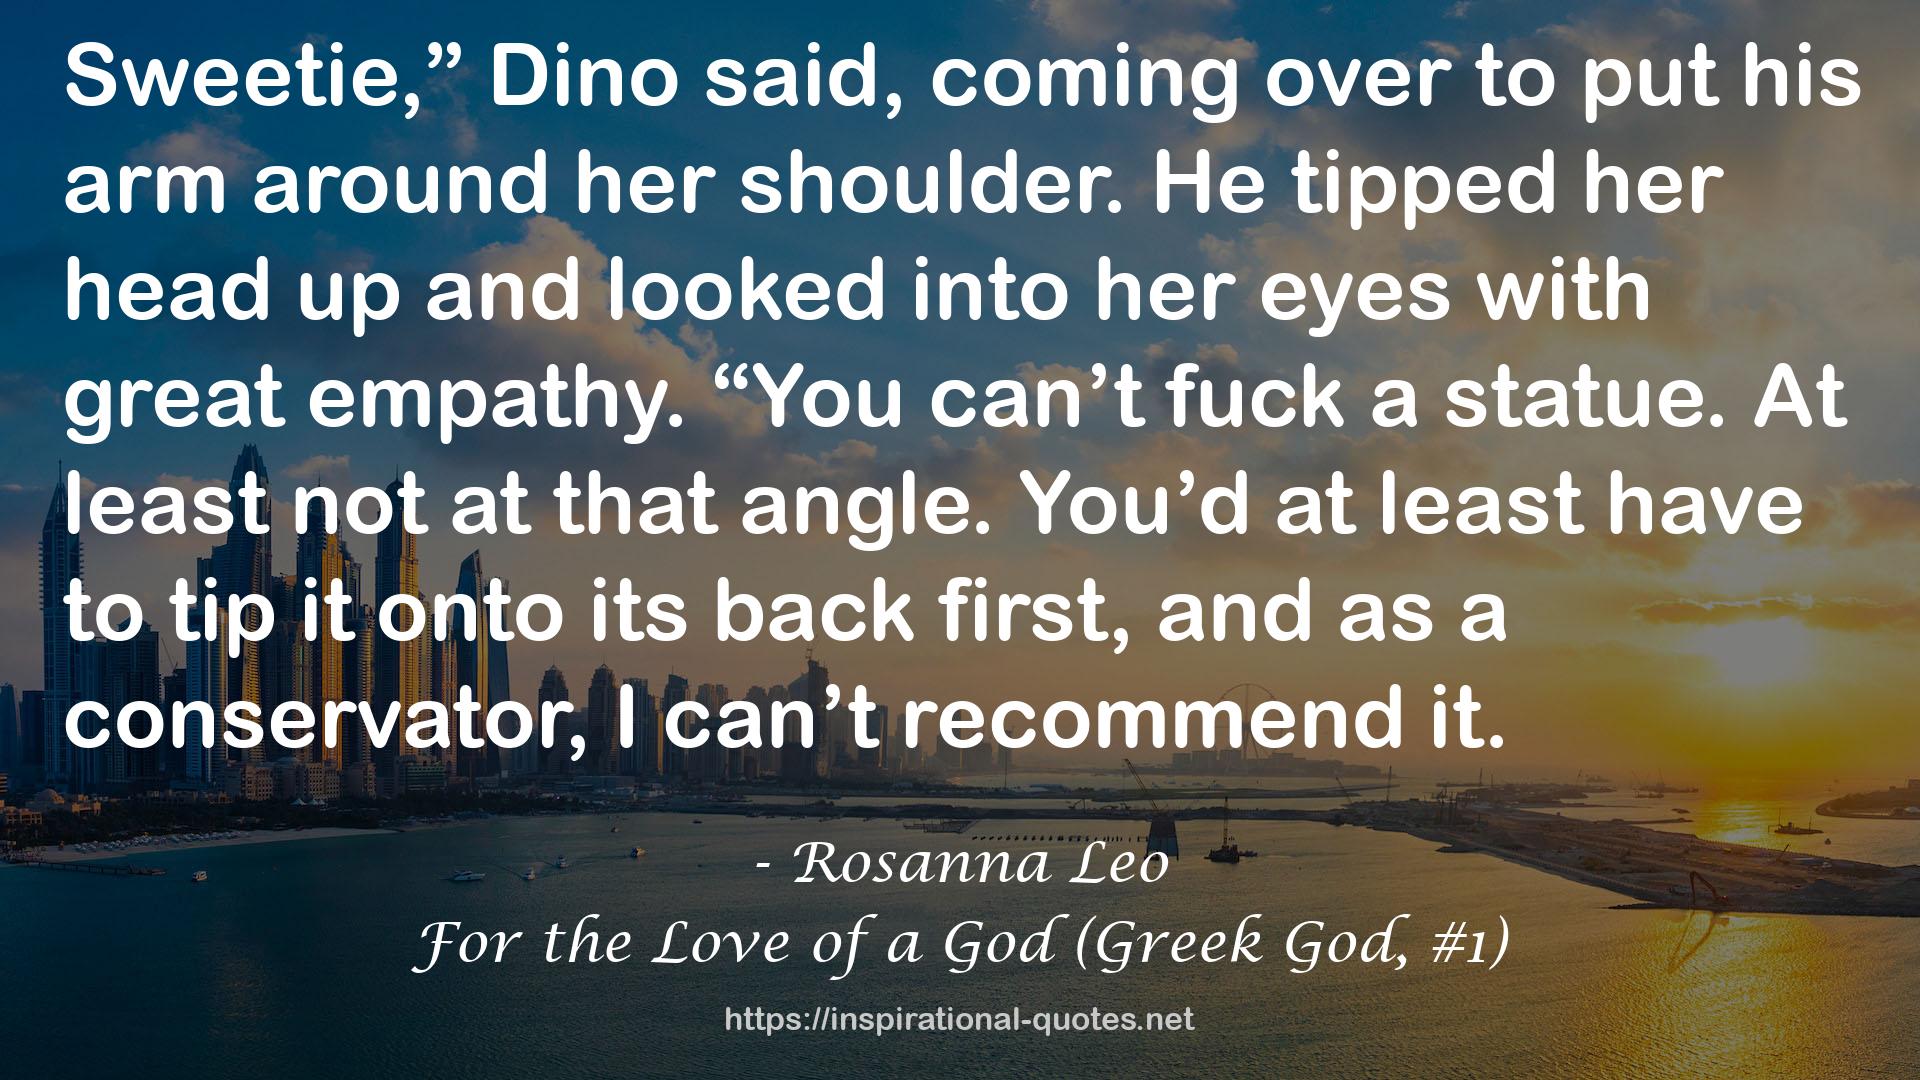 For the Love of a God (Greek God, #1) QUOTES